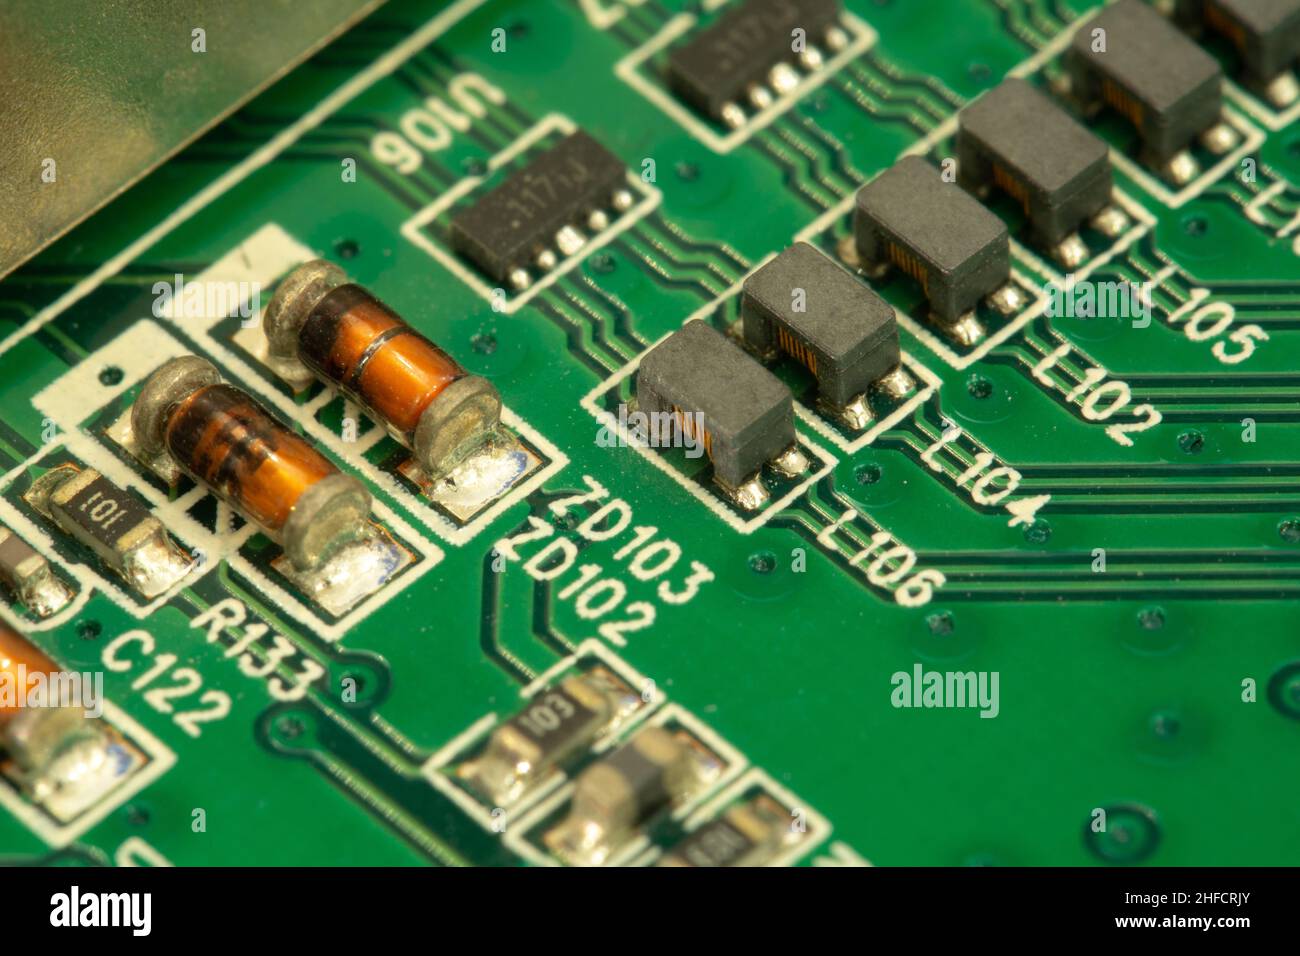 SMD inductors soldered on a green printed circuit board (PCB). Stock Photo